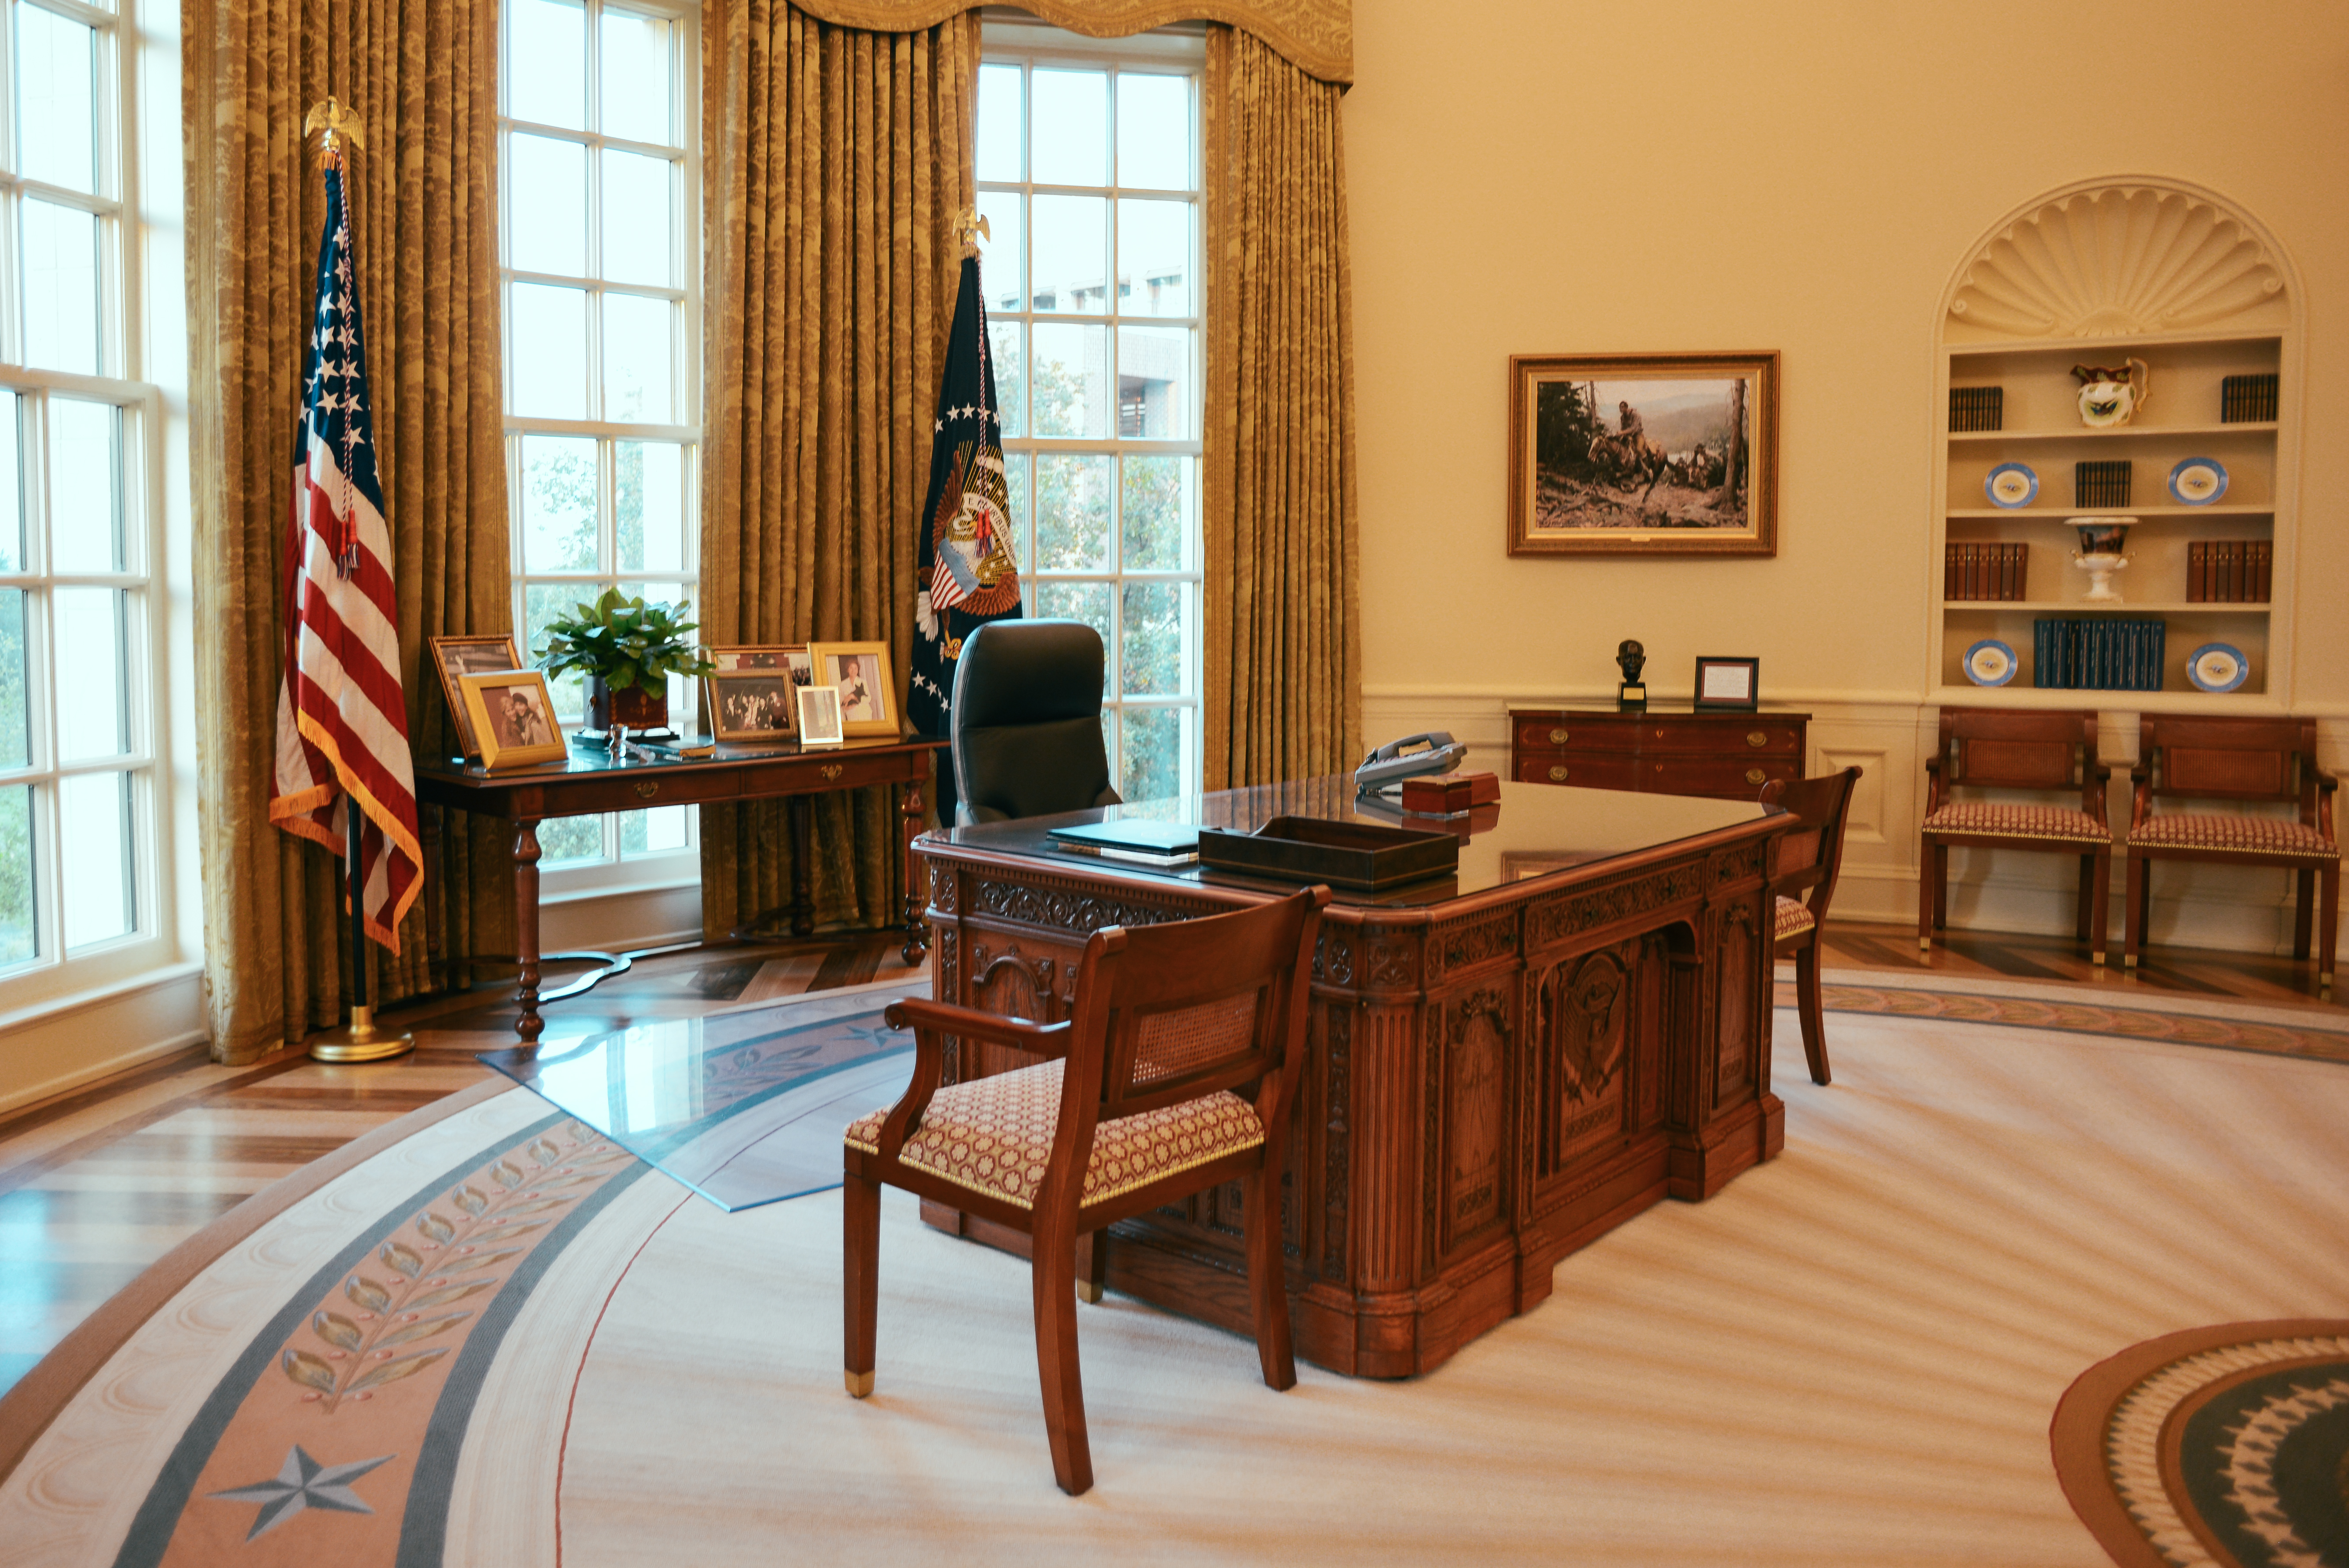 Oval Office replica featuring the Resolute Desk.